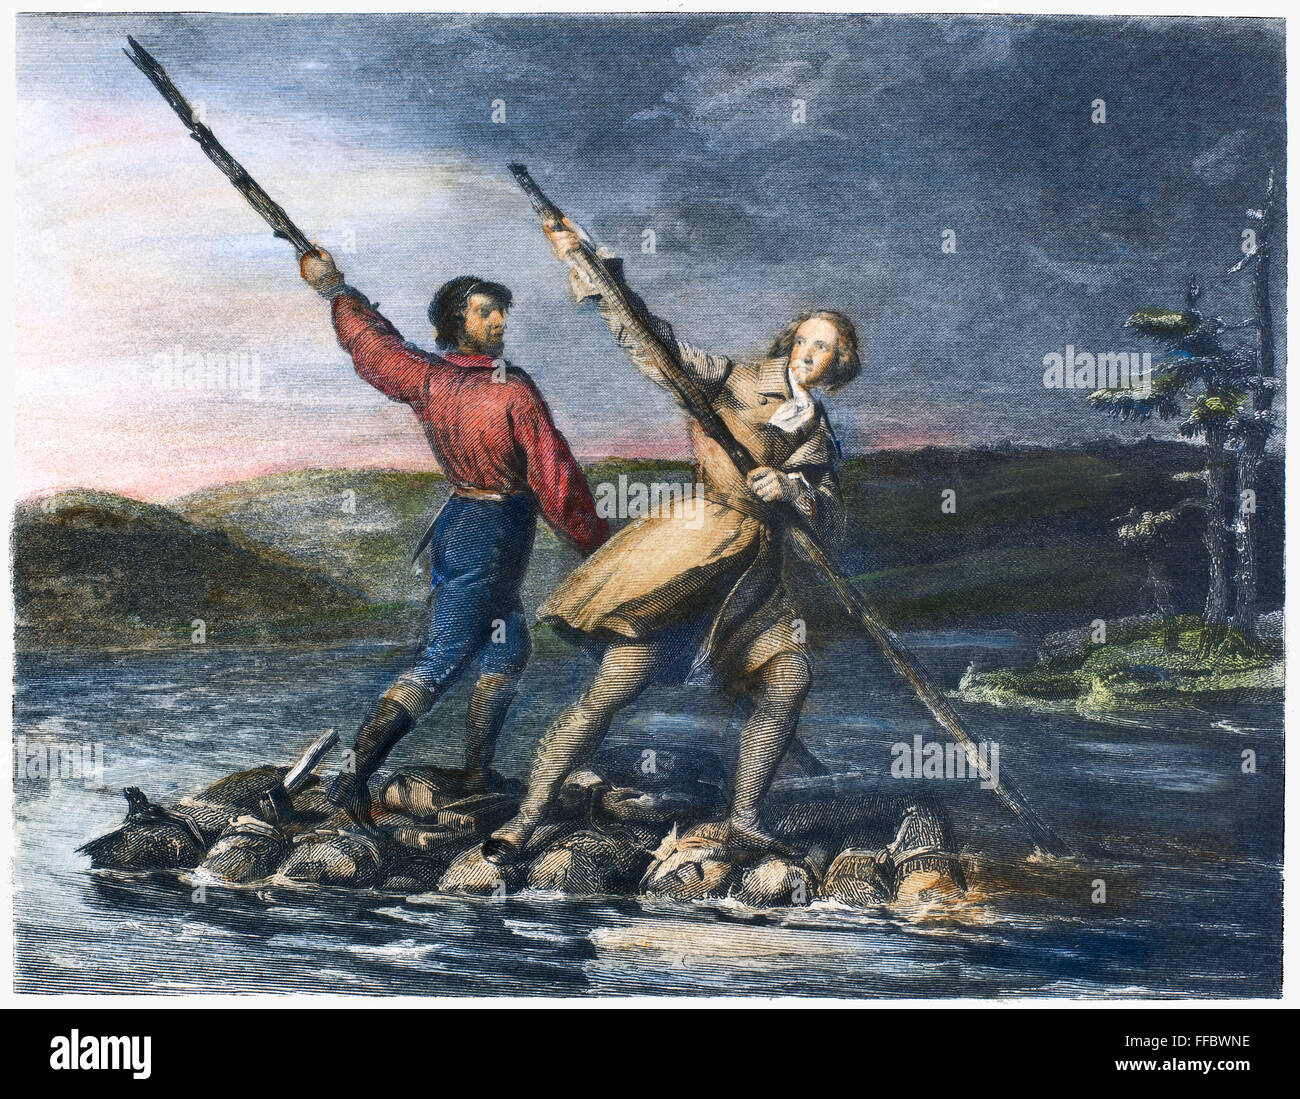 GEORGE WASHINGTON /n(1732-1799). First President of the United States. Washington (right) crossing the Allegheny River in 1753 with his guide, Christopher Gist. Steel engraving, 1844, after Daniel Huntington. Stock Photo